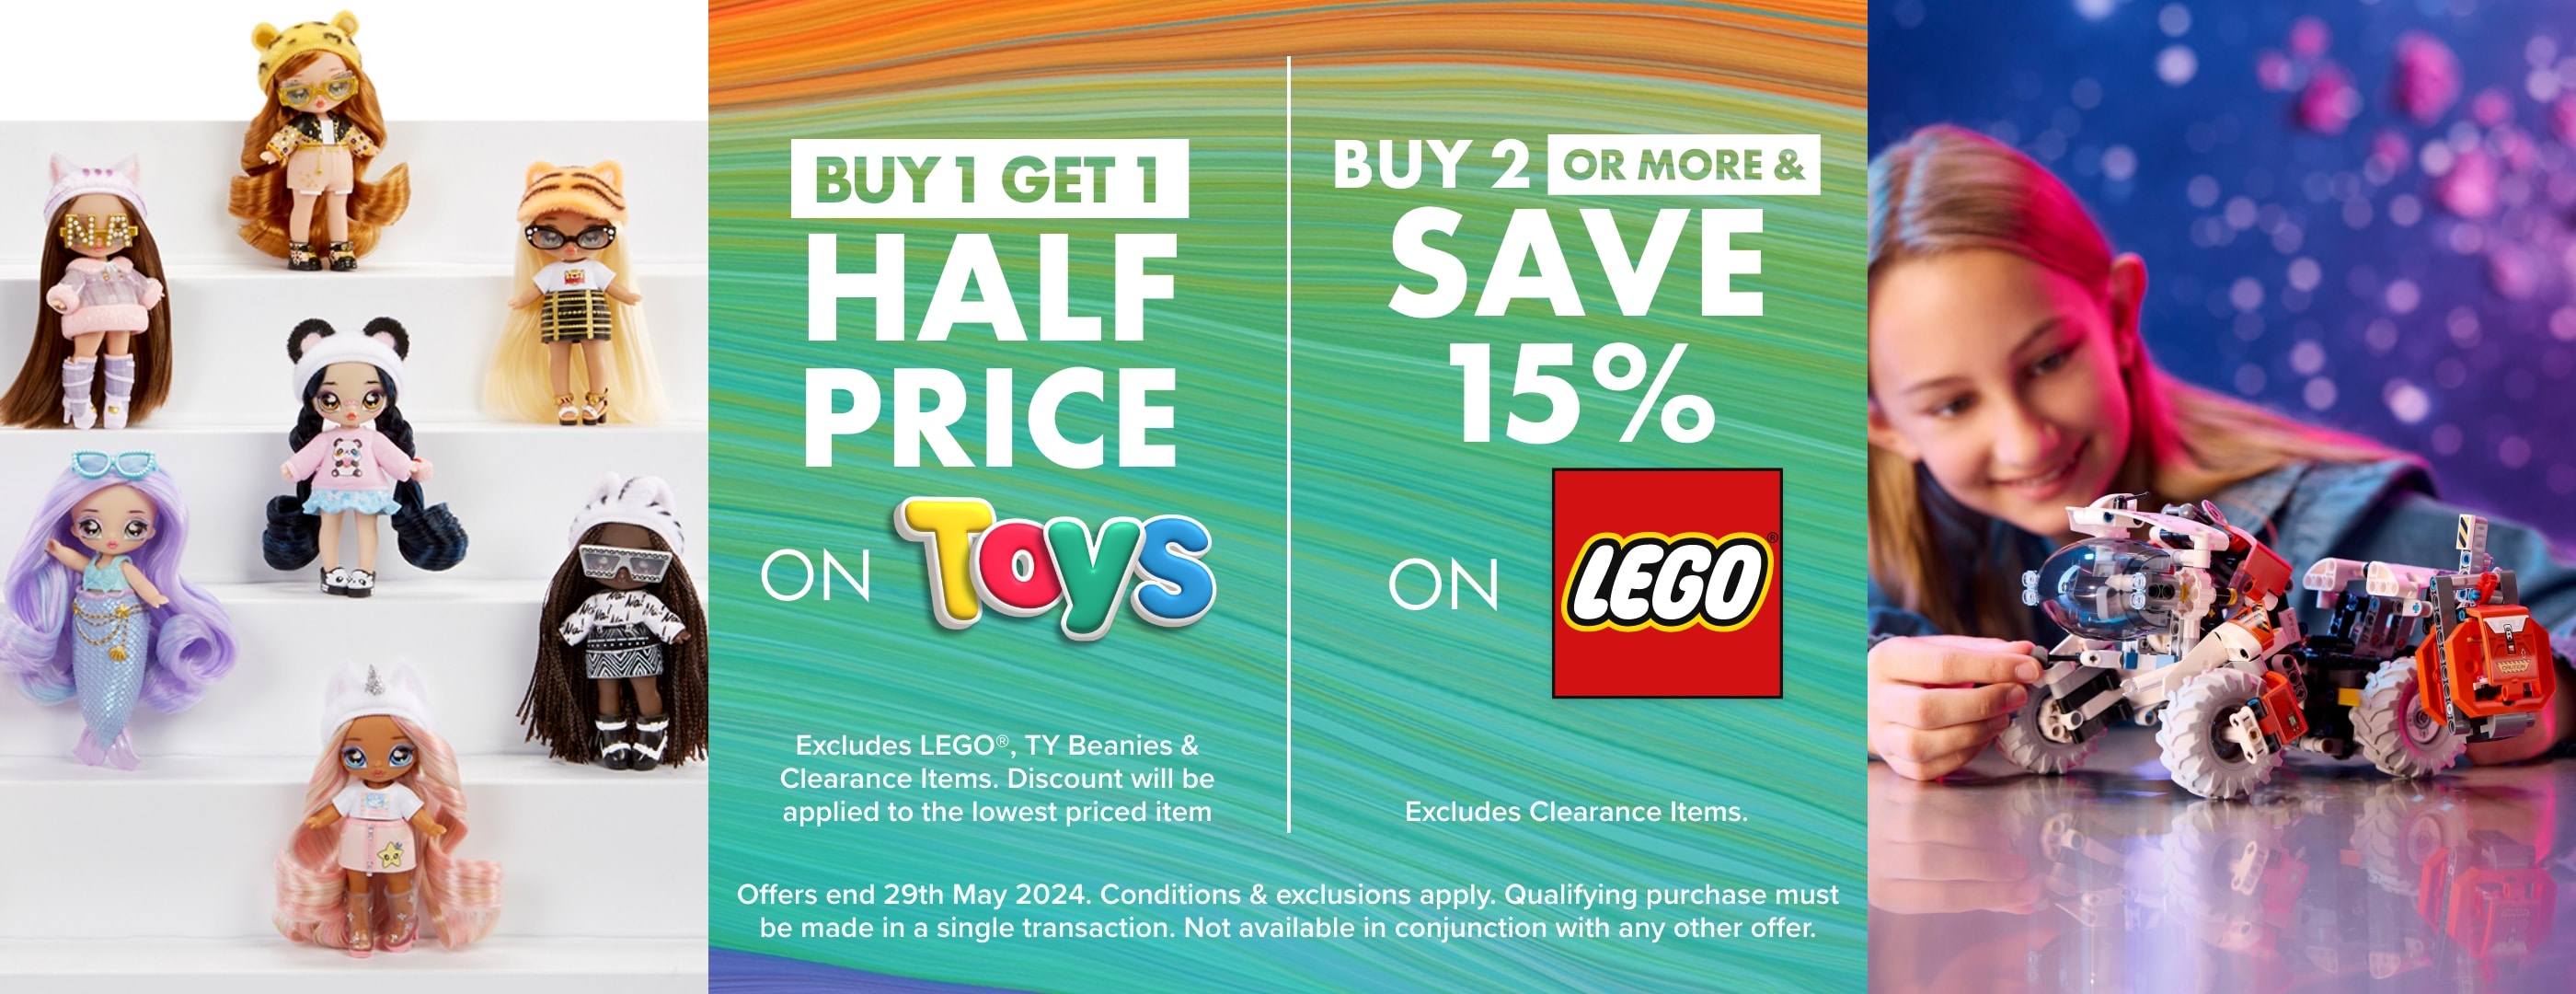 BUY 1 GET 1 HALF PRICE on Toys | Buy 2 or more & save 15% LEGO®